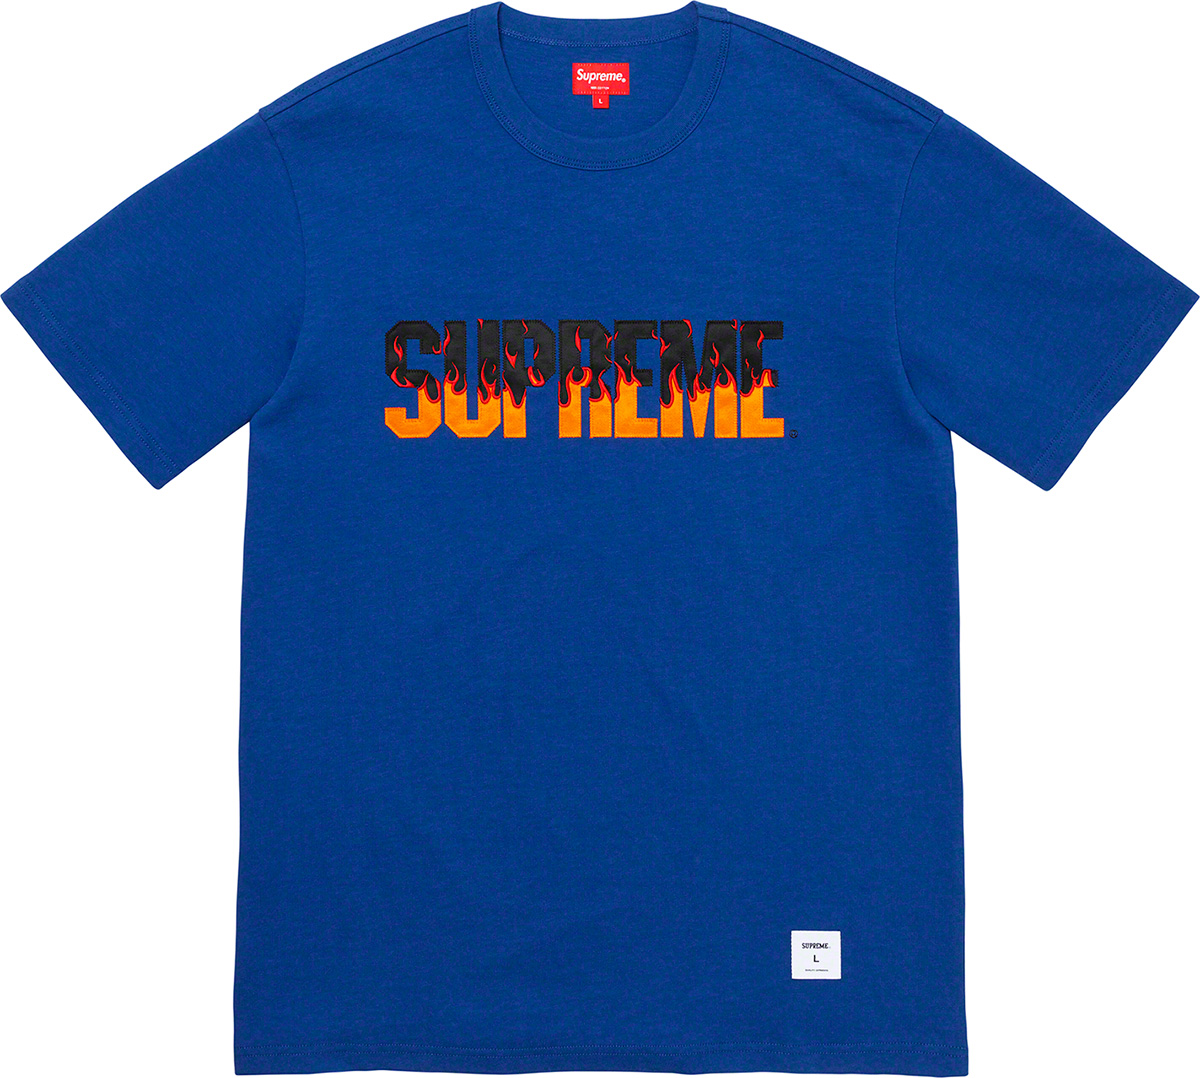 Flame S S Top - fall winter 2019 - Supreme